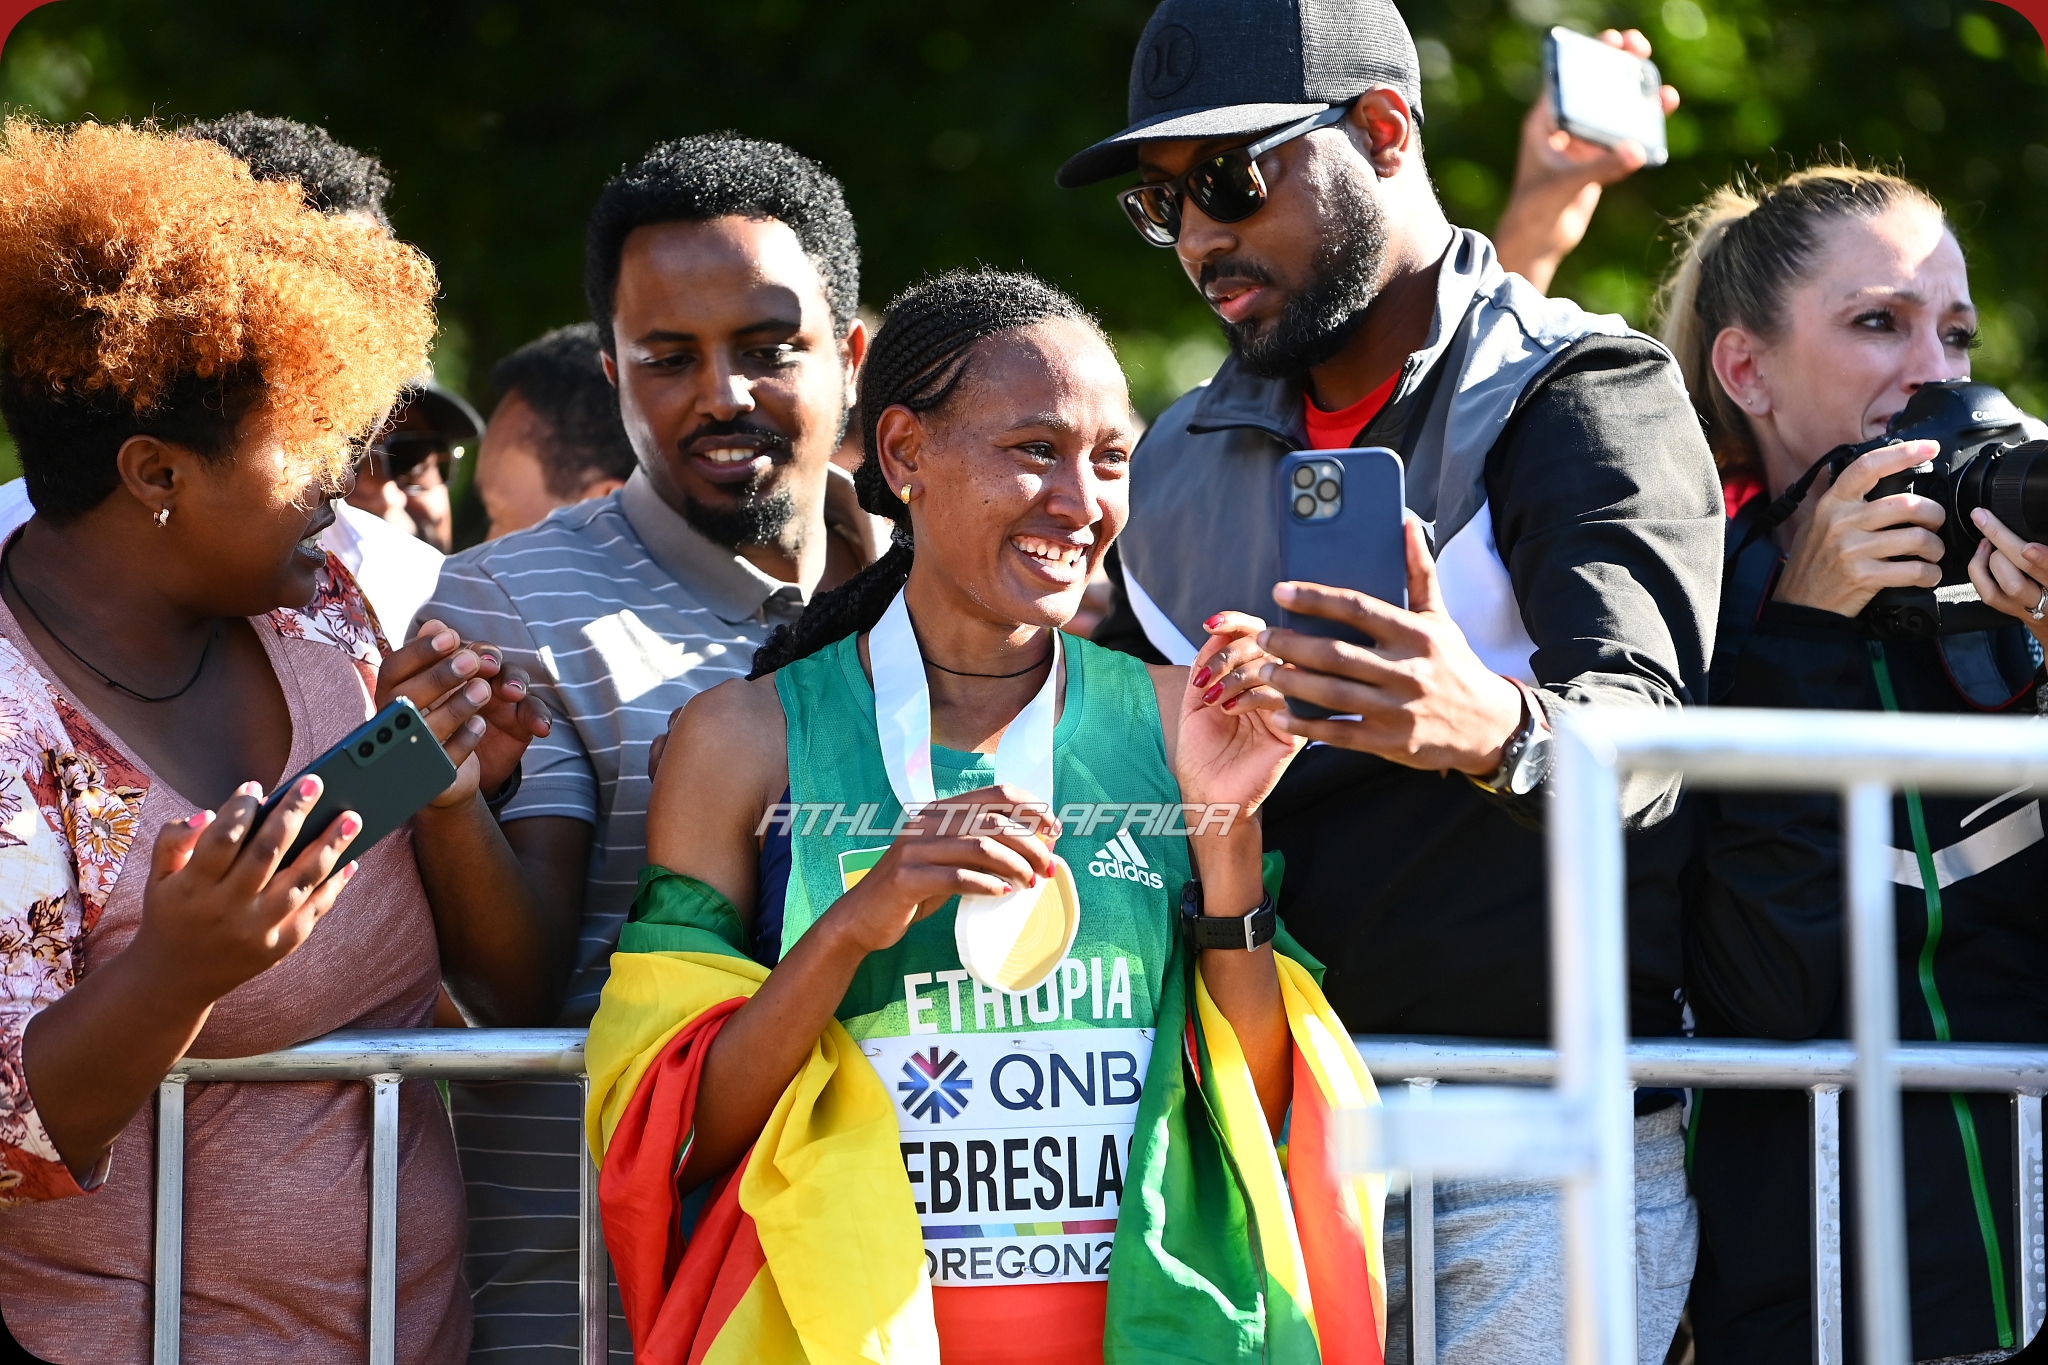 EUGENE, OREGON - JULY 18: Gotytom Gebreslase of Team Ethiopia celebrates after winning gold in the Women's Marathon on day four of the World Athletics Championships Oregon22 at Hayward Field on July 18, 2022 in Eugene, Oregon. (Photo by Hannah Peters/Getty Images for World Athletics)